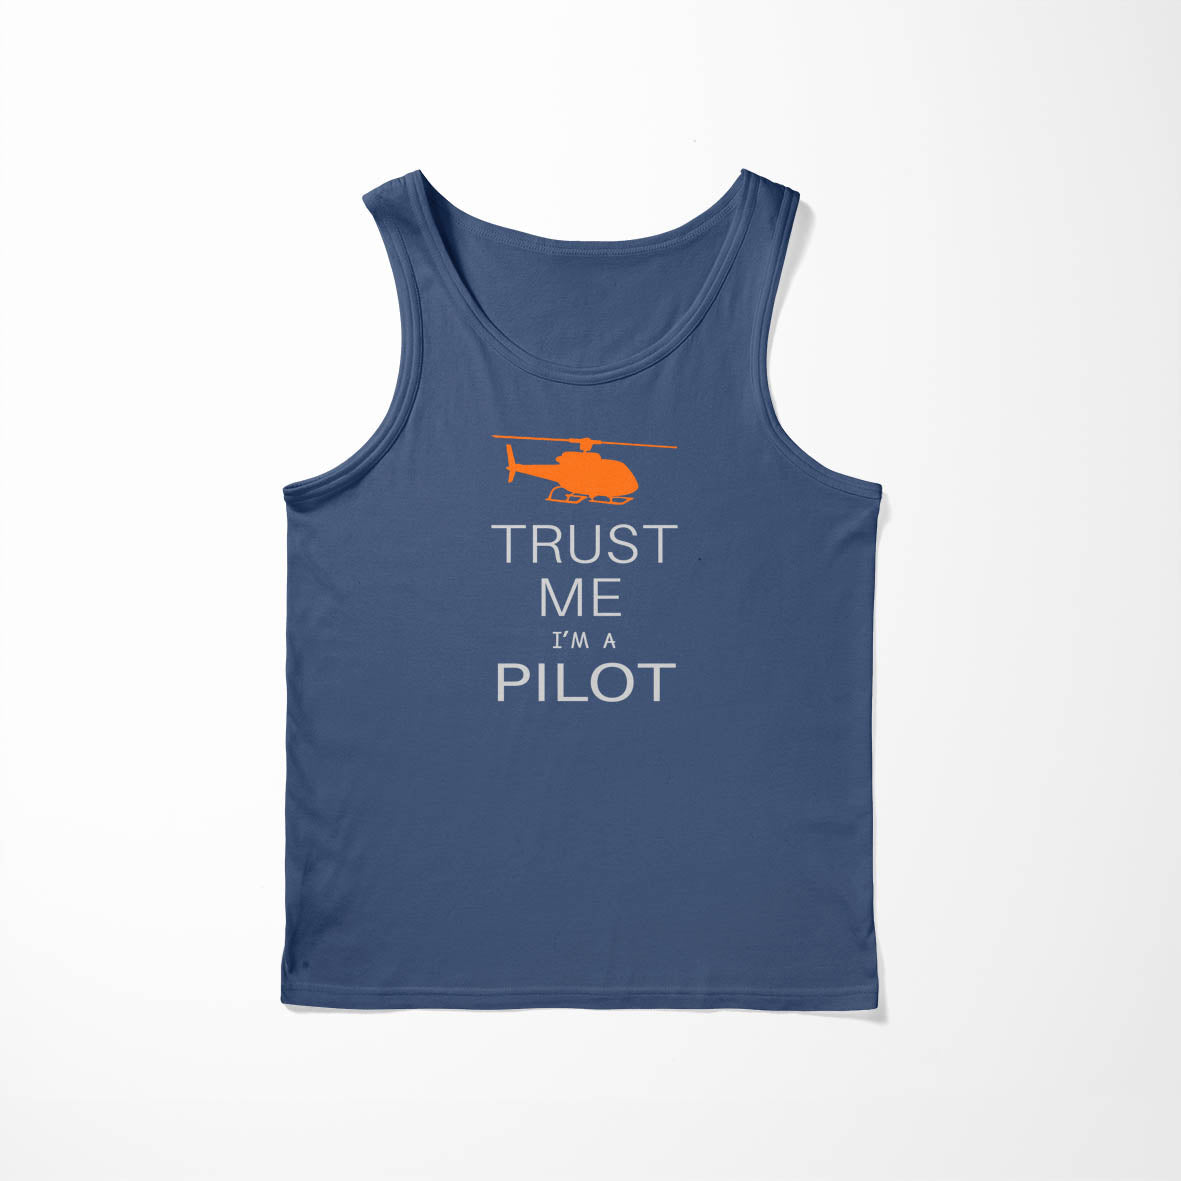 Trust Me I'm a Pilot (Helicopter) Designed Tank Tops